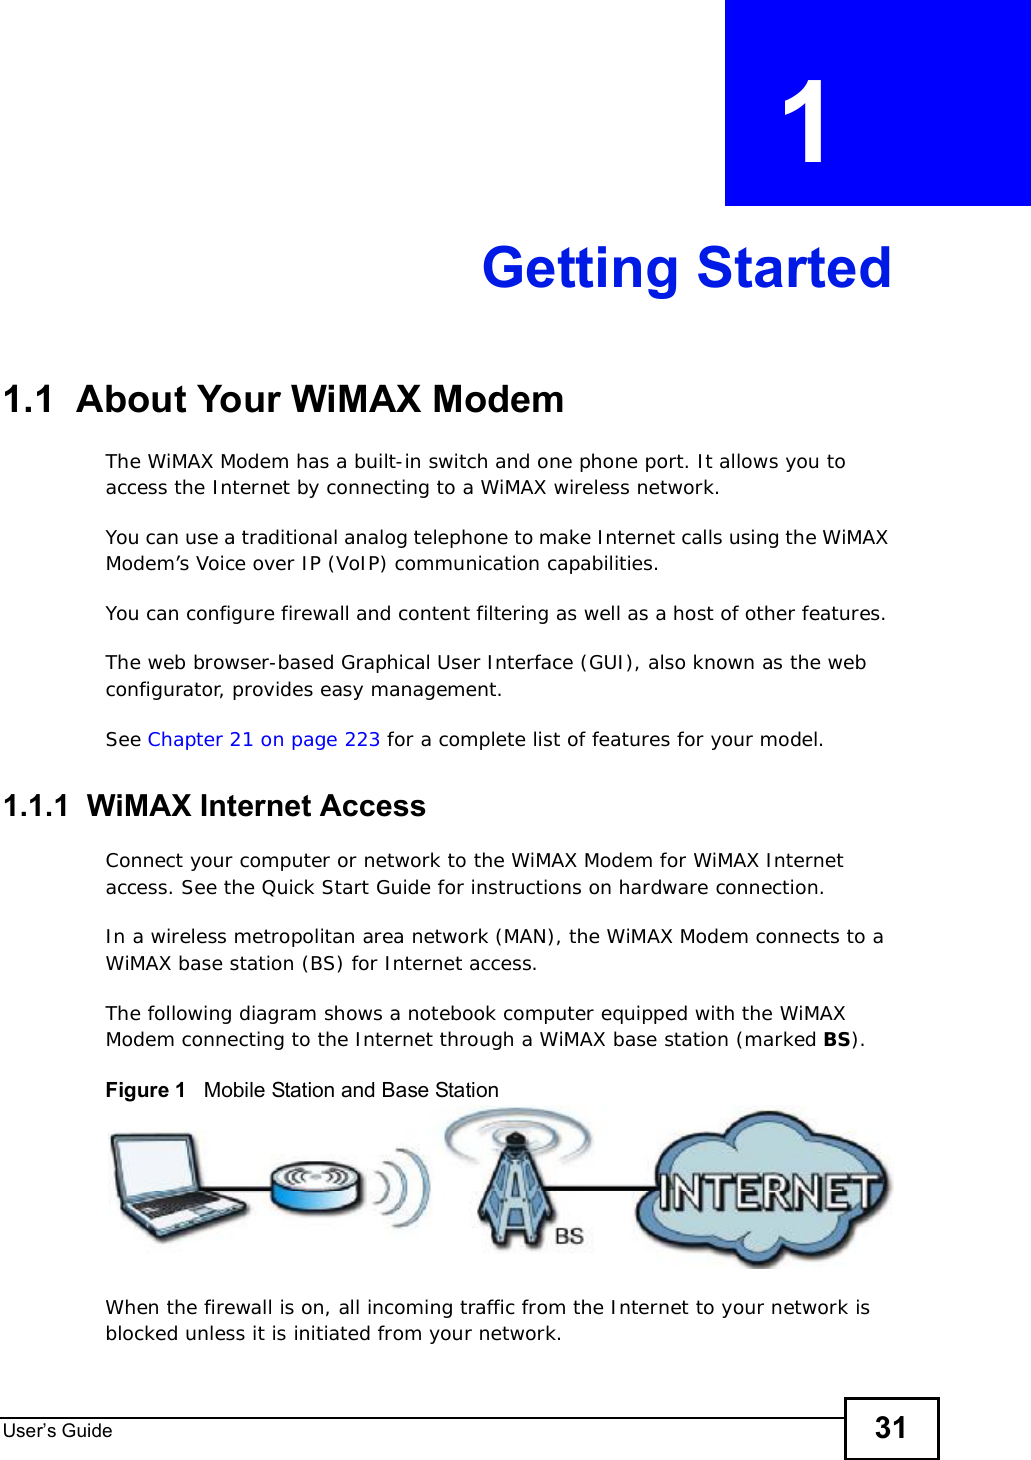 User s Guide 31CHAPTER  1 Getting Started1.1  About Your WiMAX Modem The WiMAX Modem has a built-in switch and one phone port. It allows you to access the Internet by connecting to a WiMAX wireless network. You can use a traditional analog telephone to make Internet calls using the WiMAX Modem’s Voice over IP (VoIP) communication capabilities. You can configure firewall and content filtering as well as a host of other features. The web browser-based Graphical User Interface (GUI), also known as the web configurator, provides easy management.See Chapter 21 on page 223 for a complete list of features for your model.1.1.1  WiMAX Internet AccessConnect your computer or network to the WiMAX Modem for WiMAX Internet access. See the Quick Start Guide for instructions on hardware connection.In a wireless metropolitan area network (MAN), the WiMAX Modem connects to a WiMAX base station (BS) for Internet access. The following diagram shows a notebook computer equipped with the WiMAX Modem connecting to the Internet through a WiMAX base station (marked BS).Figure 1   Mobile Station and Base StationWhen the firewall is on, all incoming traffic from the Internet to your network is blocked unless it is initiated from your network. 